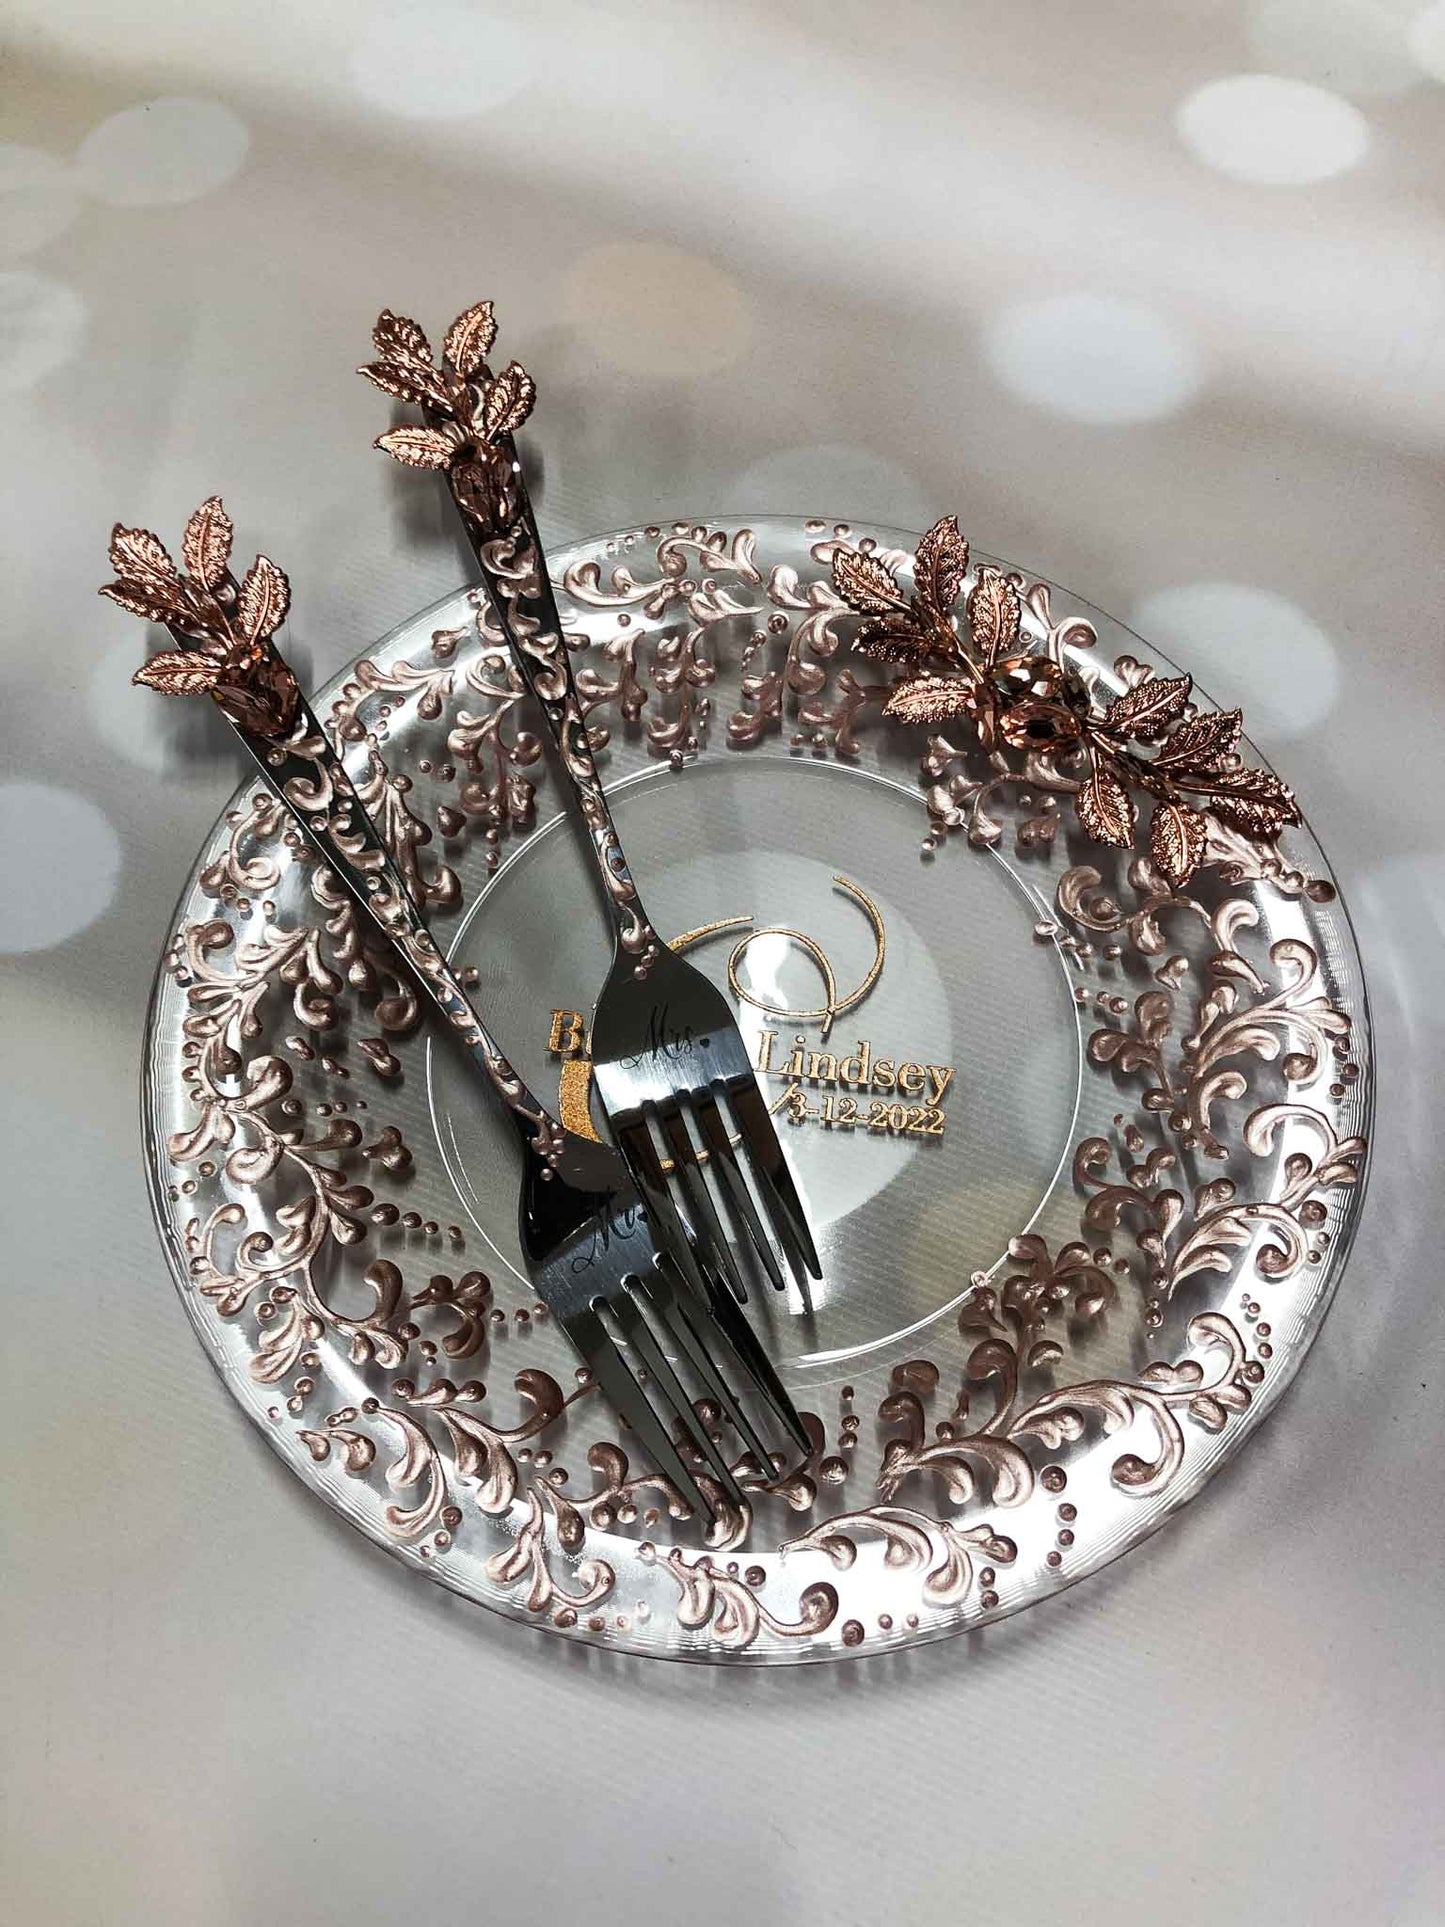 Decorative plate and forks for wedding cake